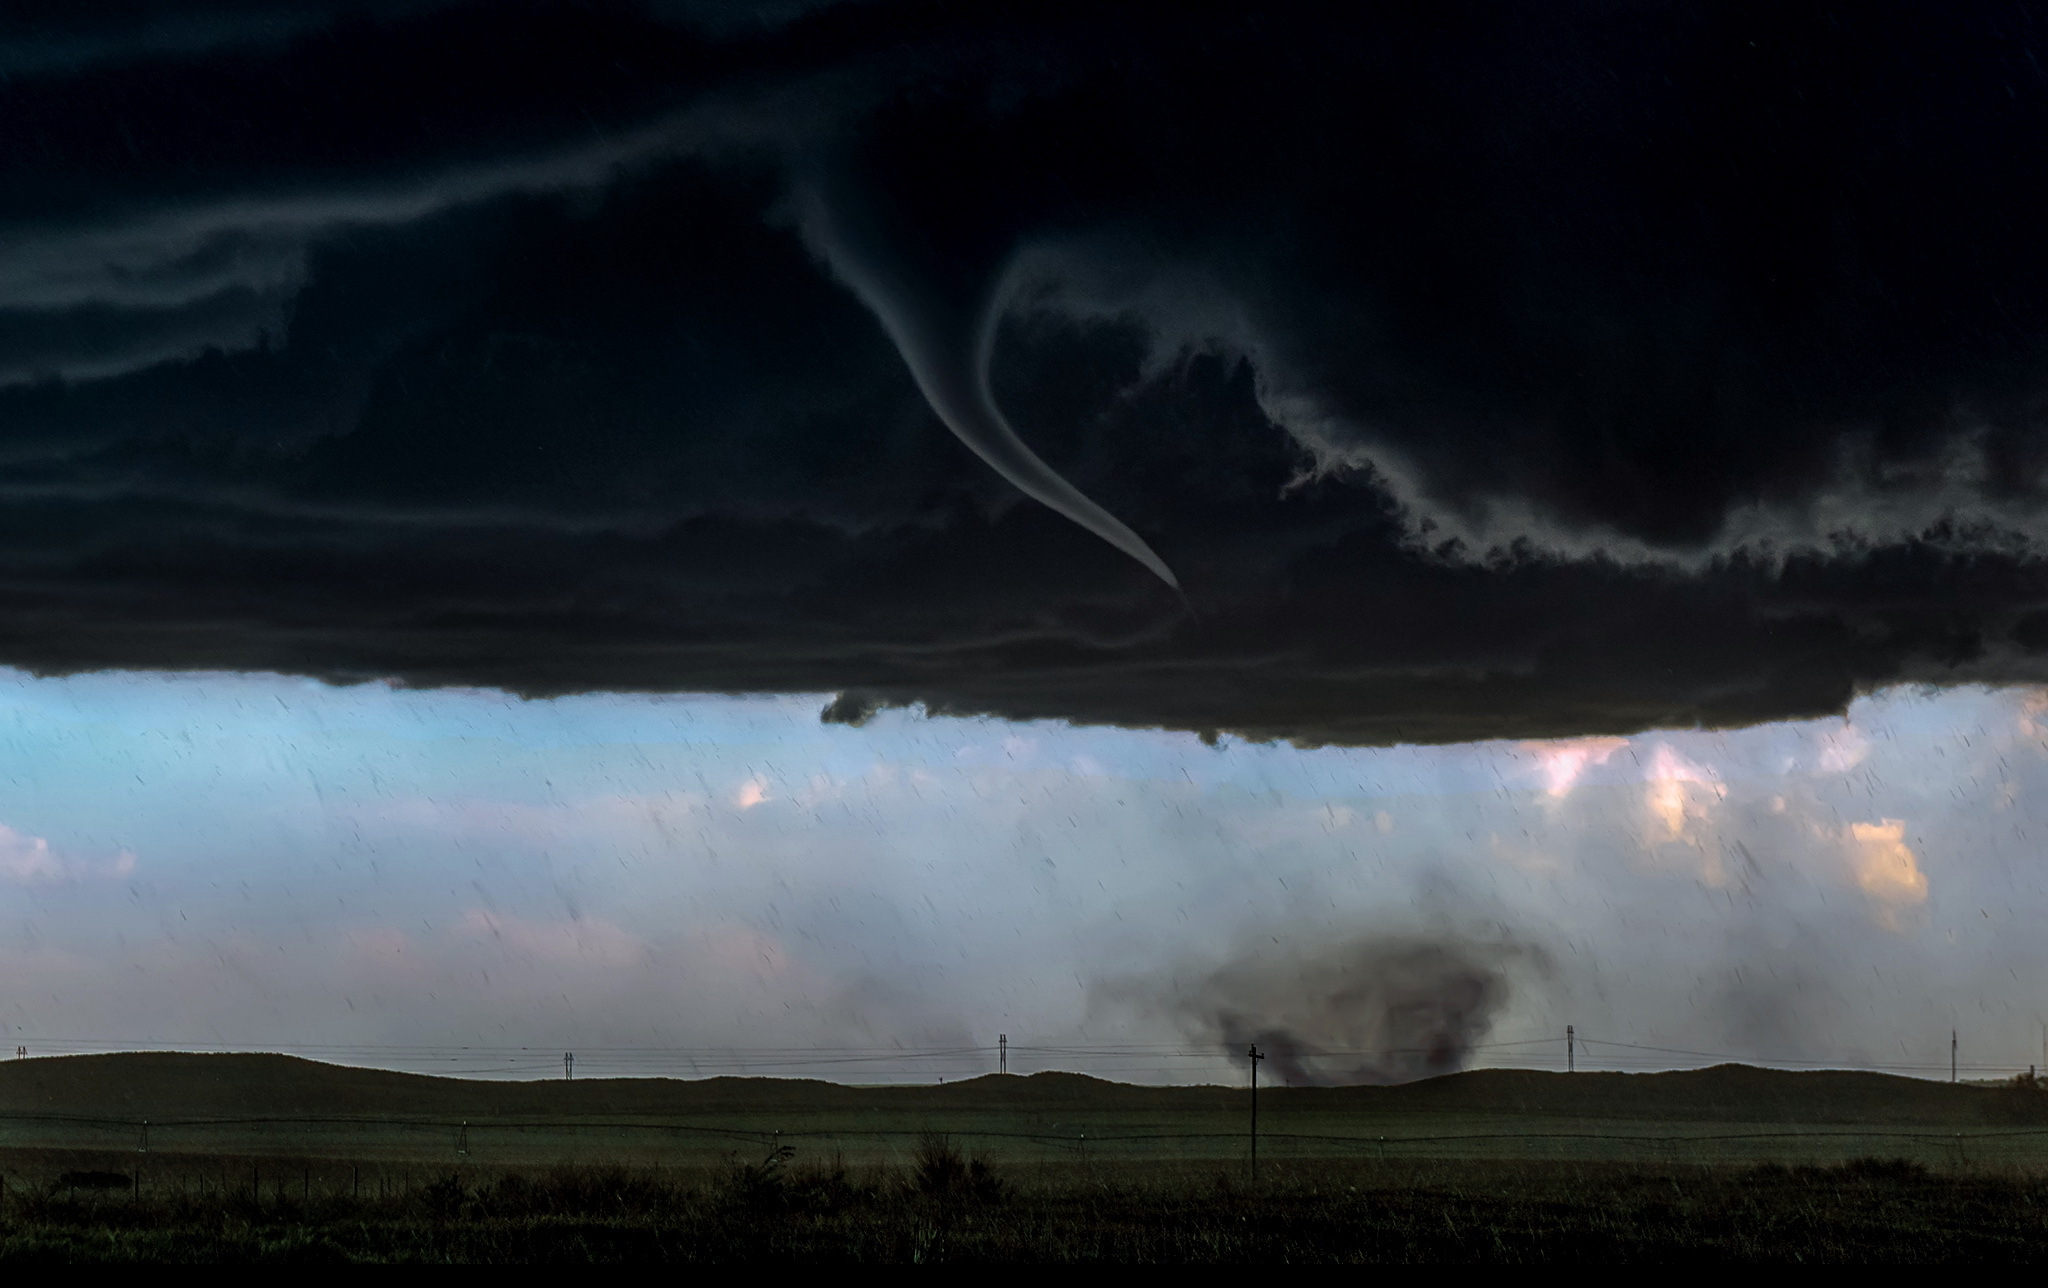 2048x1288 10+ Tornado HD Wallpapers and Backgrounds